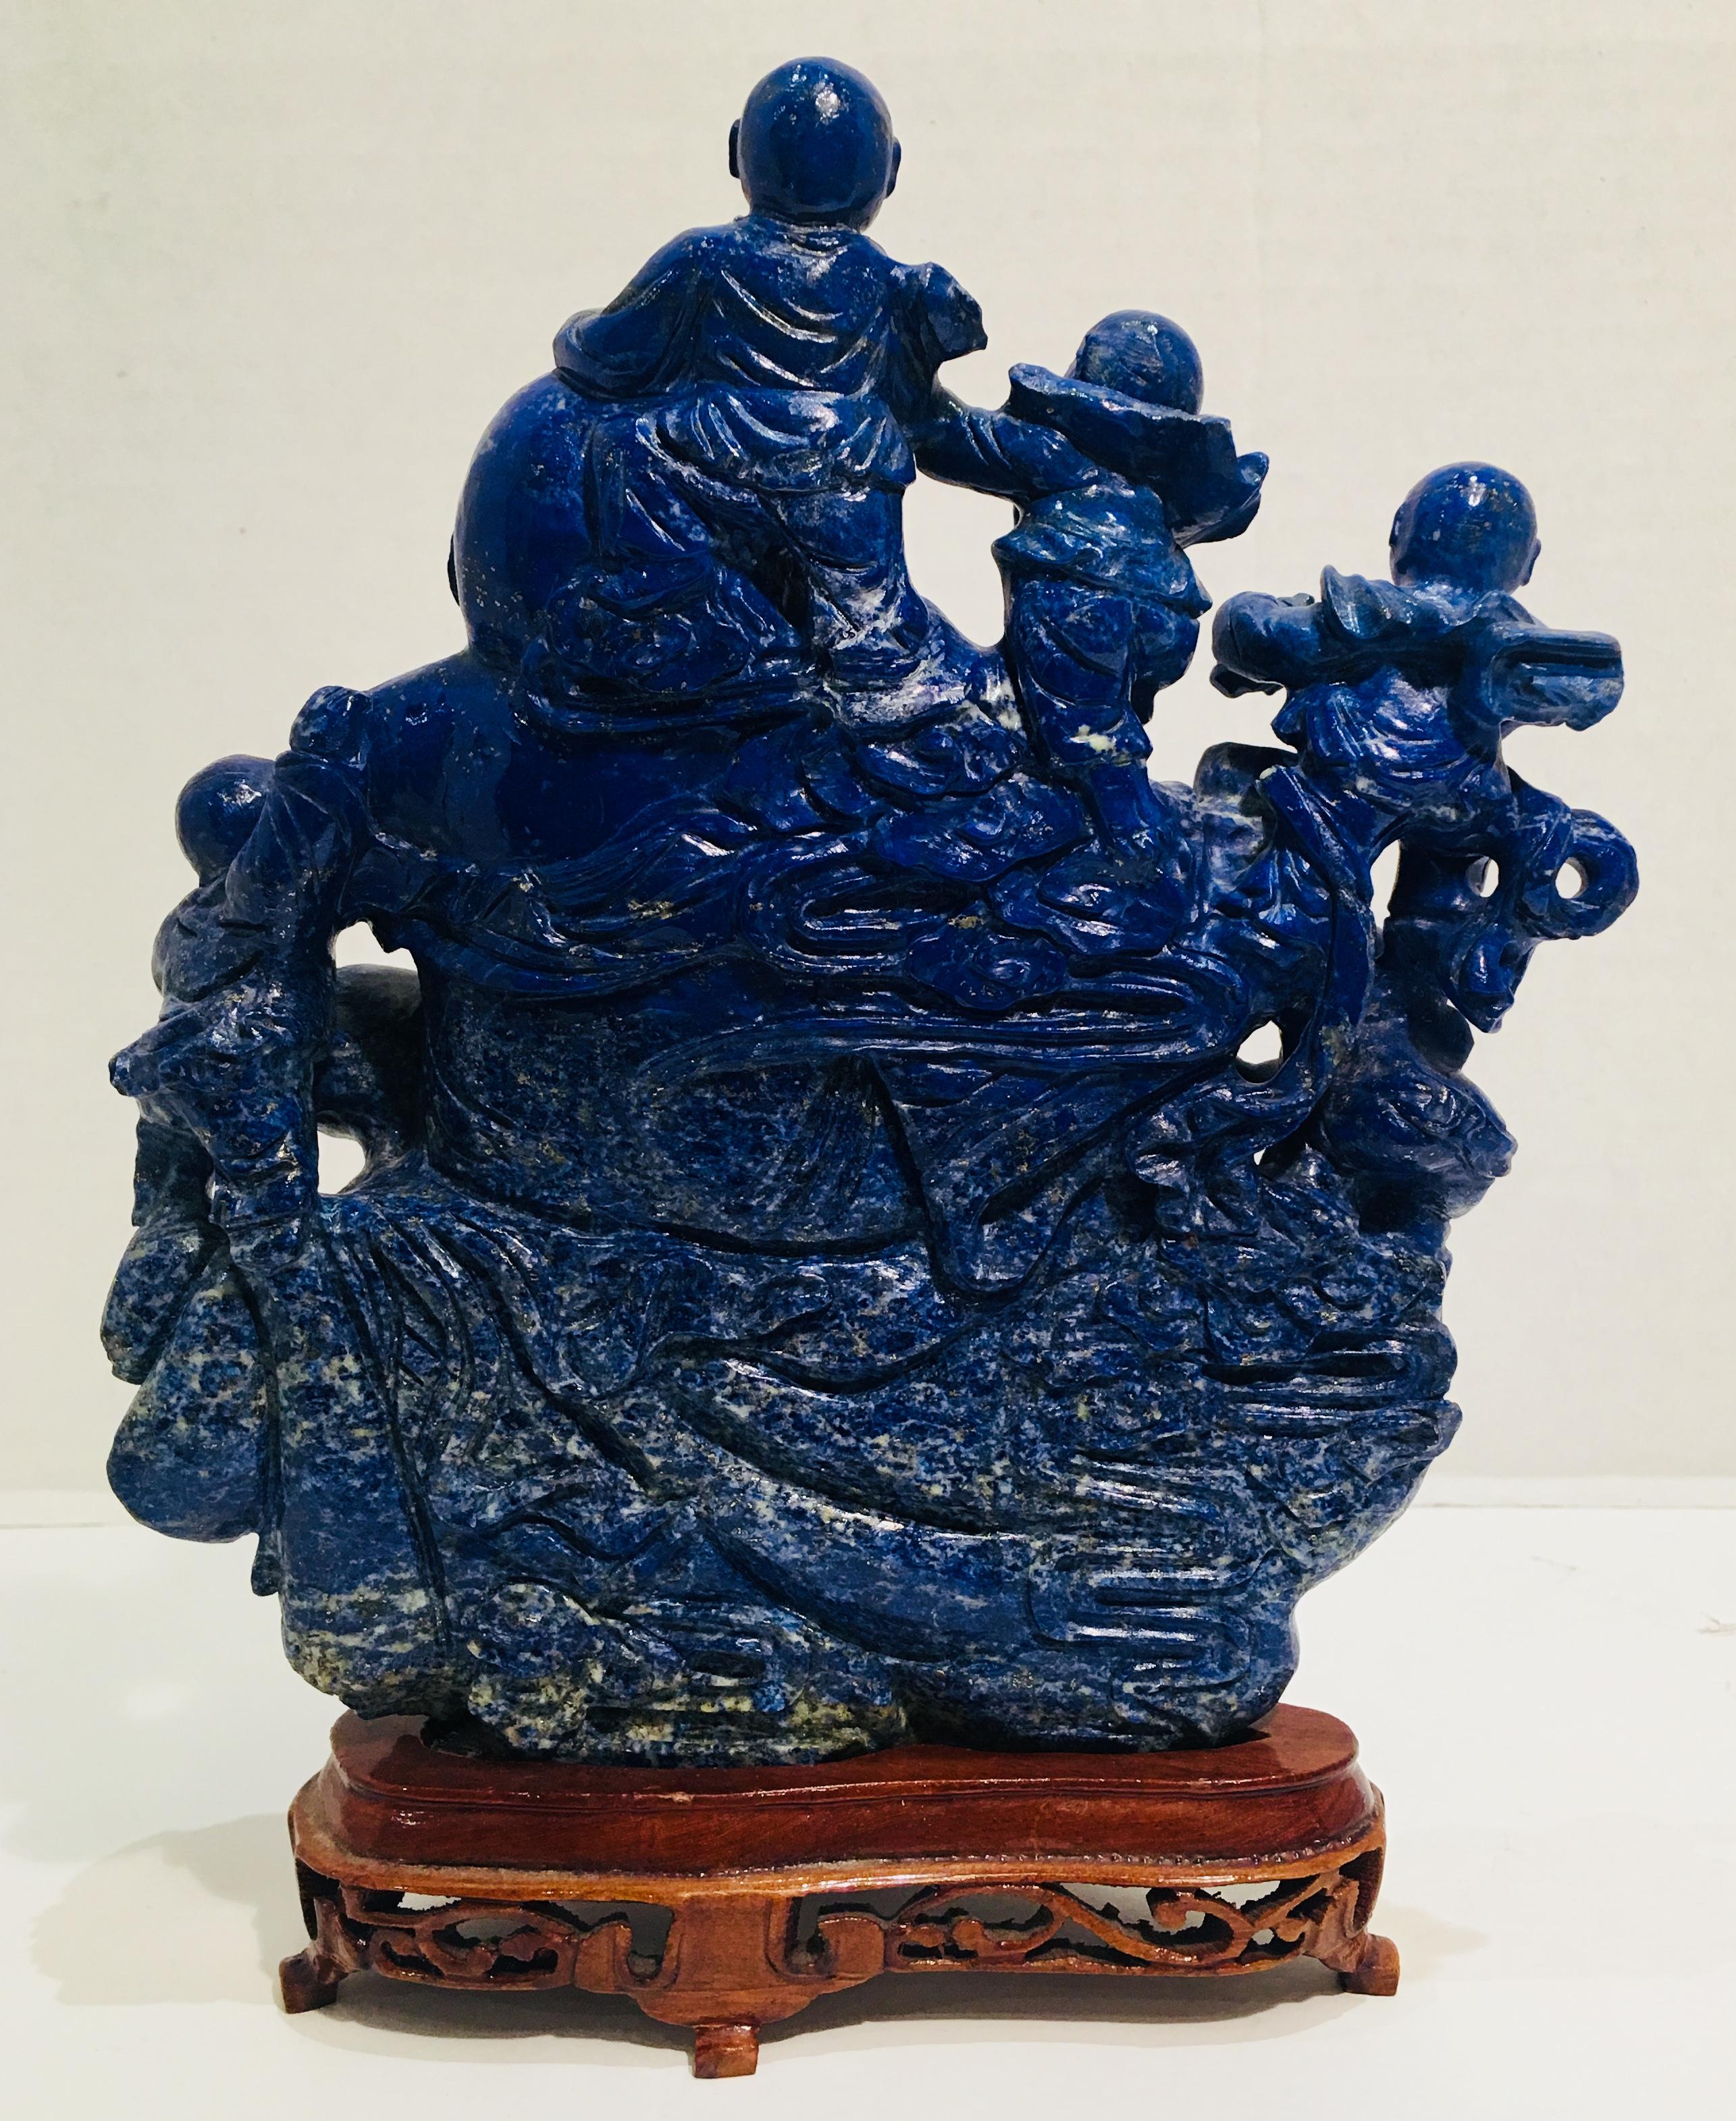 Carved lapis lazuli statue of Chinese Laughing Buddha and his five children with a removable carved wooden Stand is a vintage, estate, three-dimensional, intricately hand-carved, bright blue, variegated lapis lazuli stone sculpture.

Known by